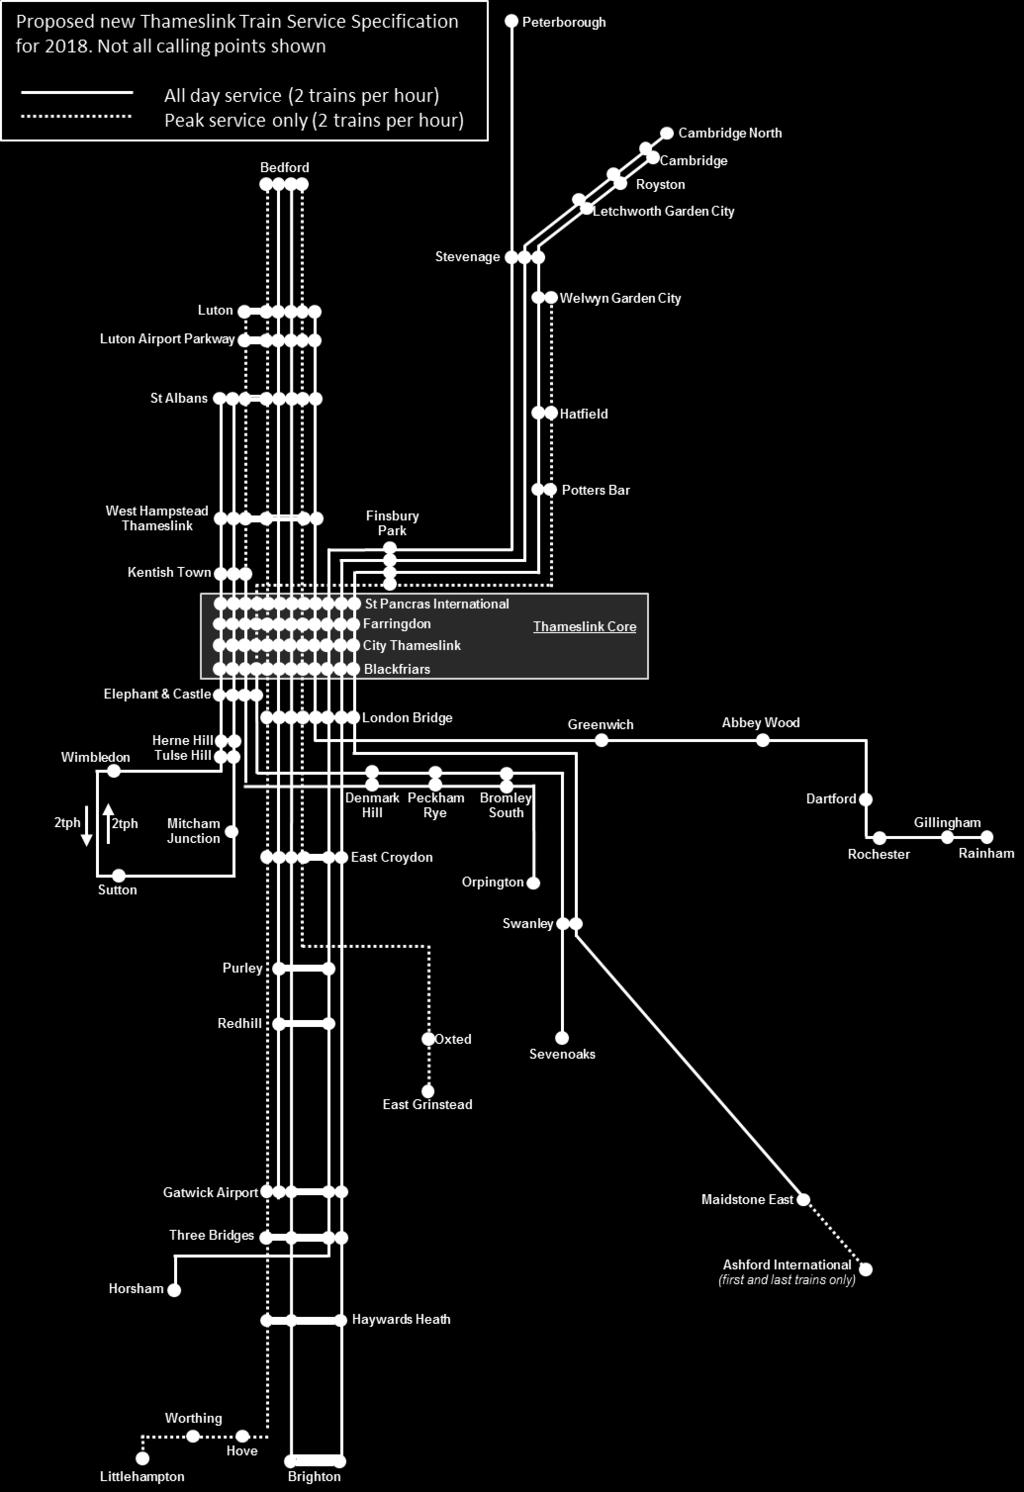 Proposed Thameslink service patterns from 2018